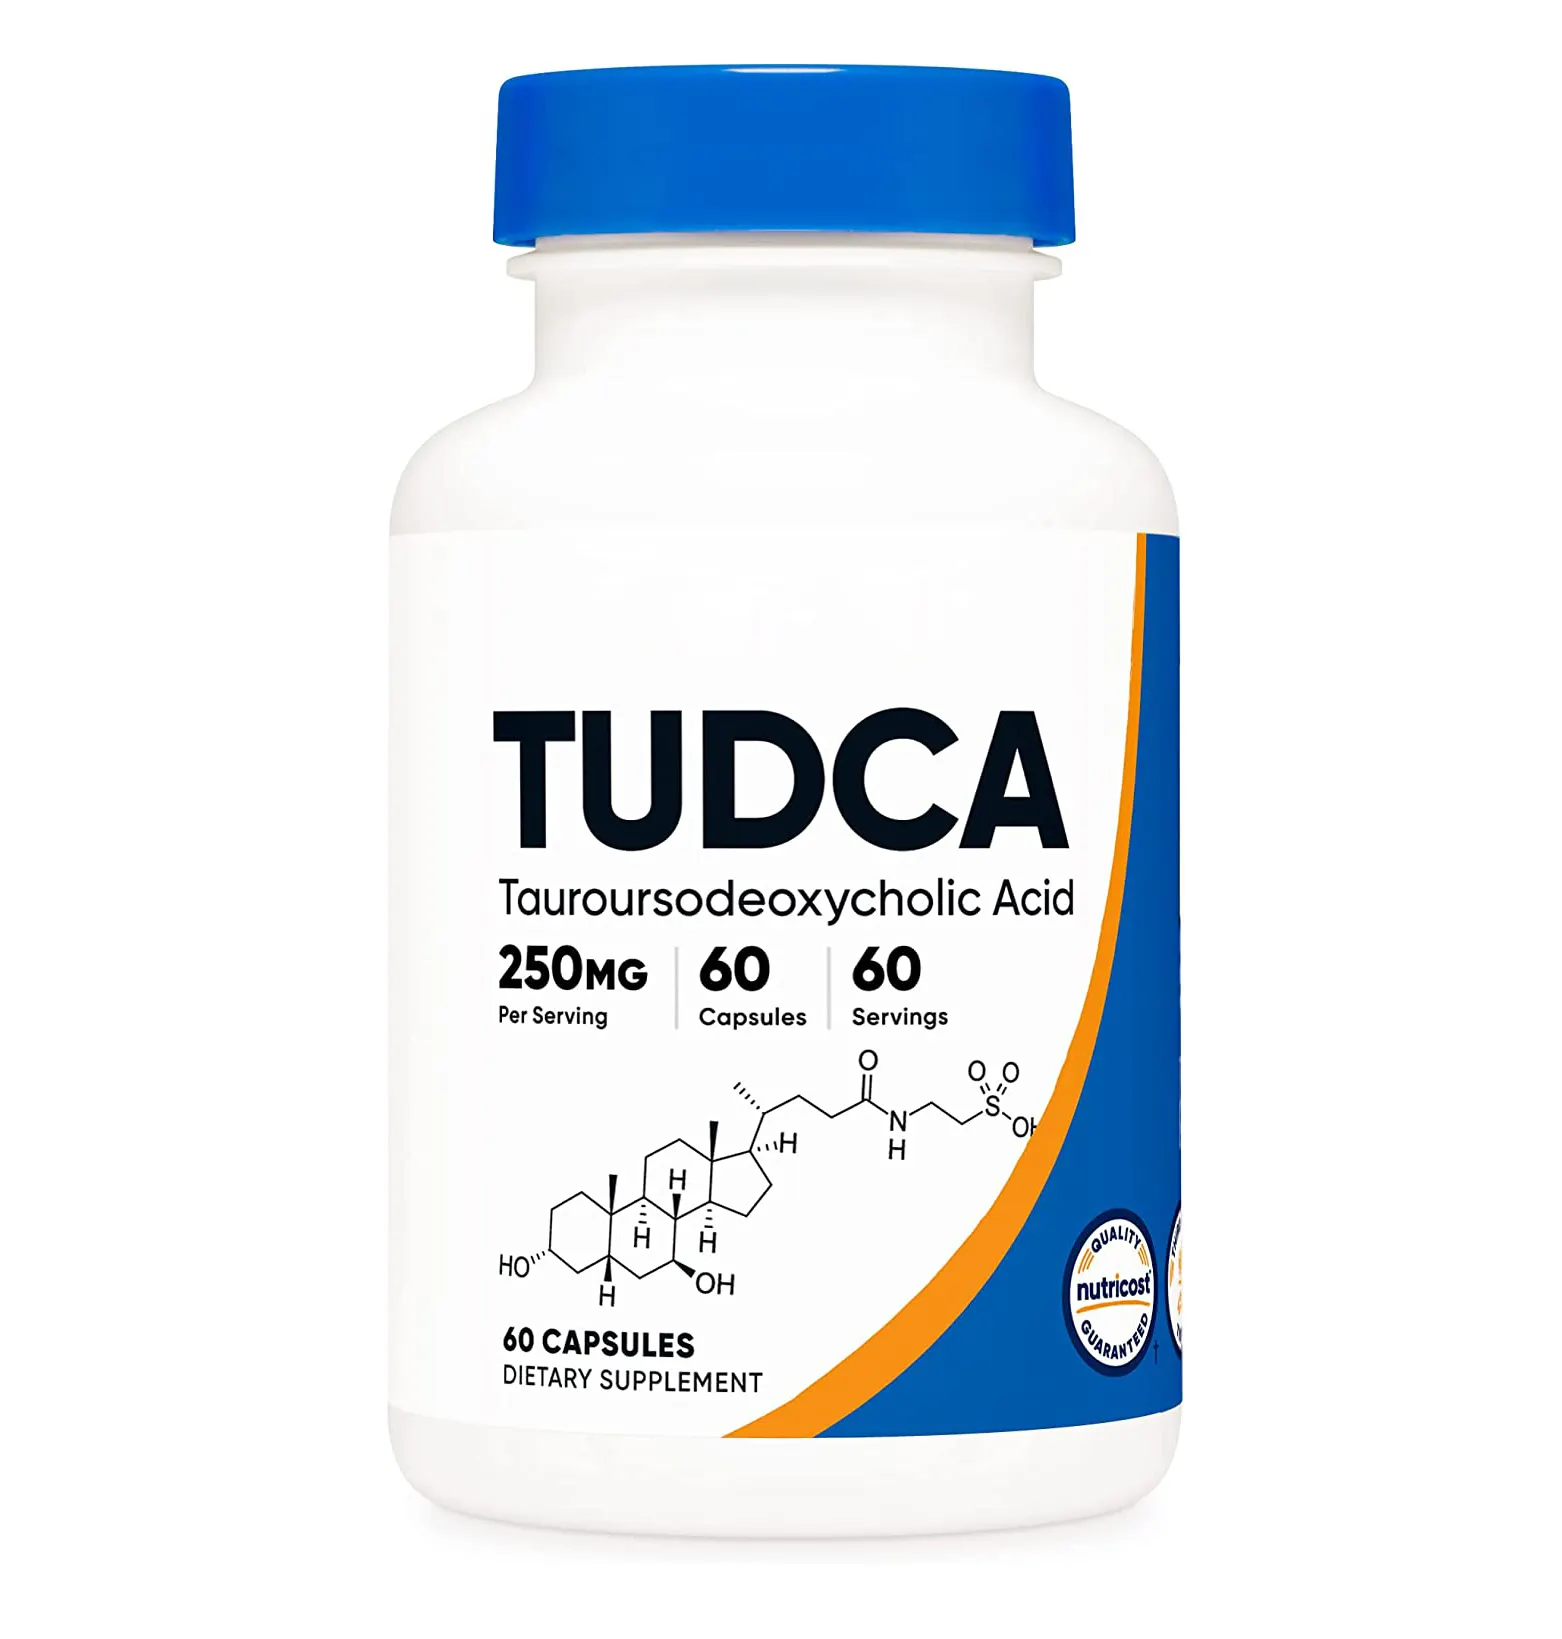 Private Label Liver Detox Cleanse Tudca Supplement TUDCA 500mg Detox Capsules Tudca Liver Support Health Aid Detox and Cleanse